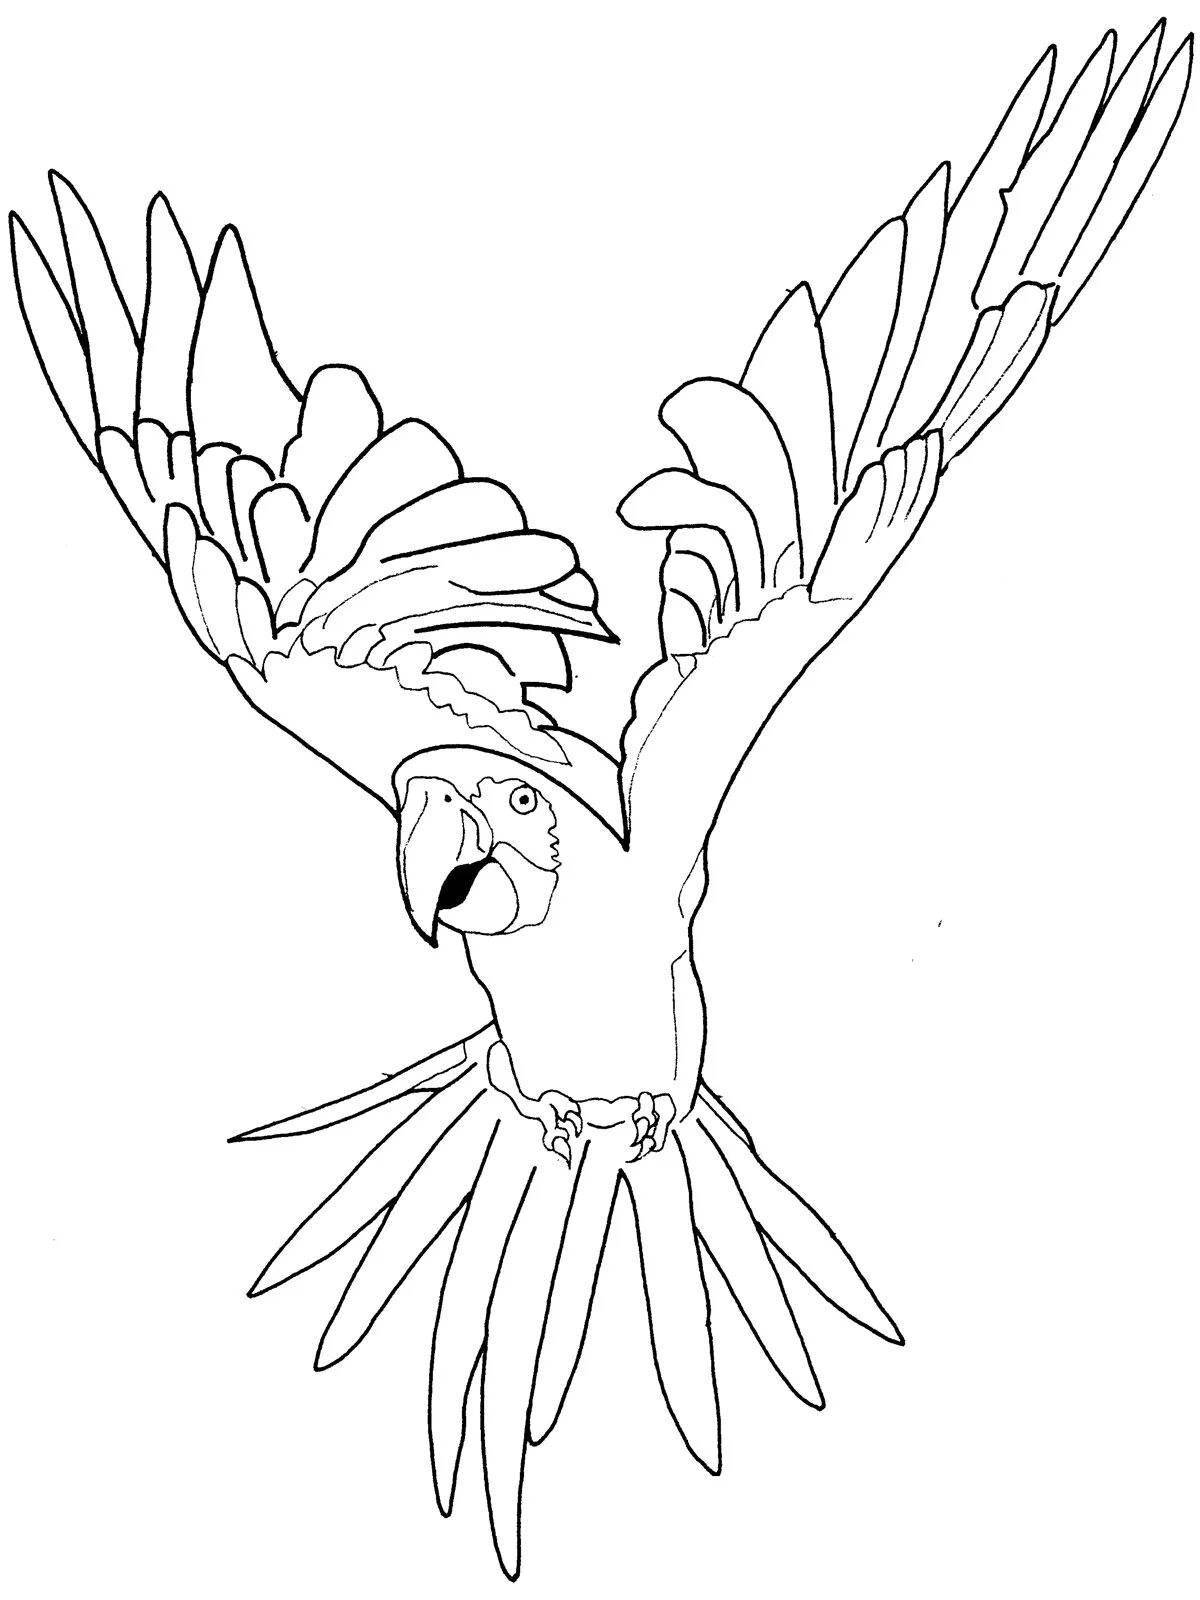 Coloring book bright blue macaw